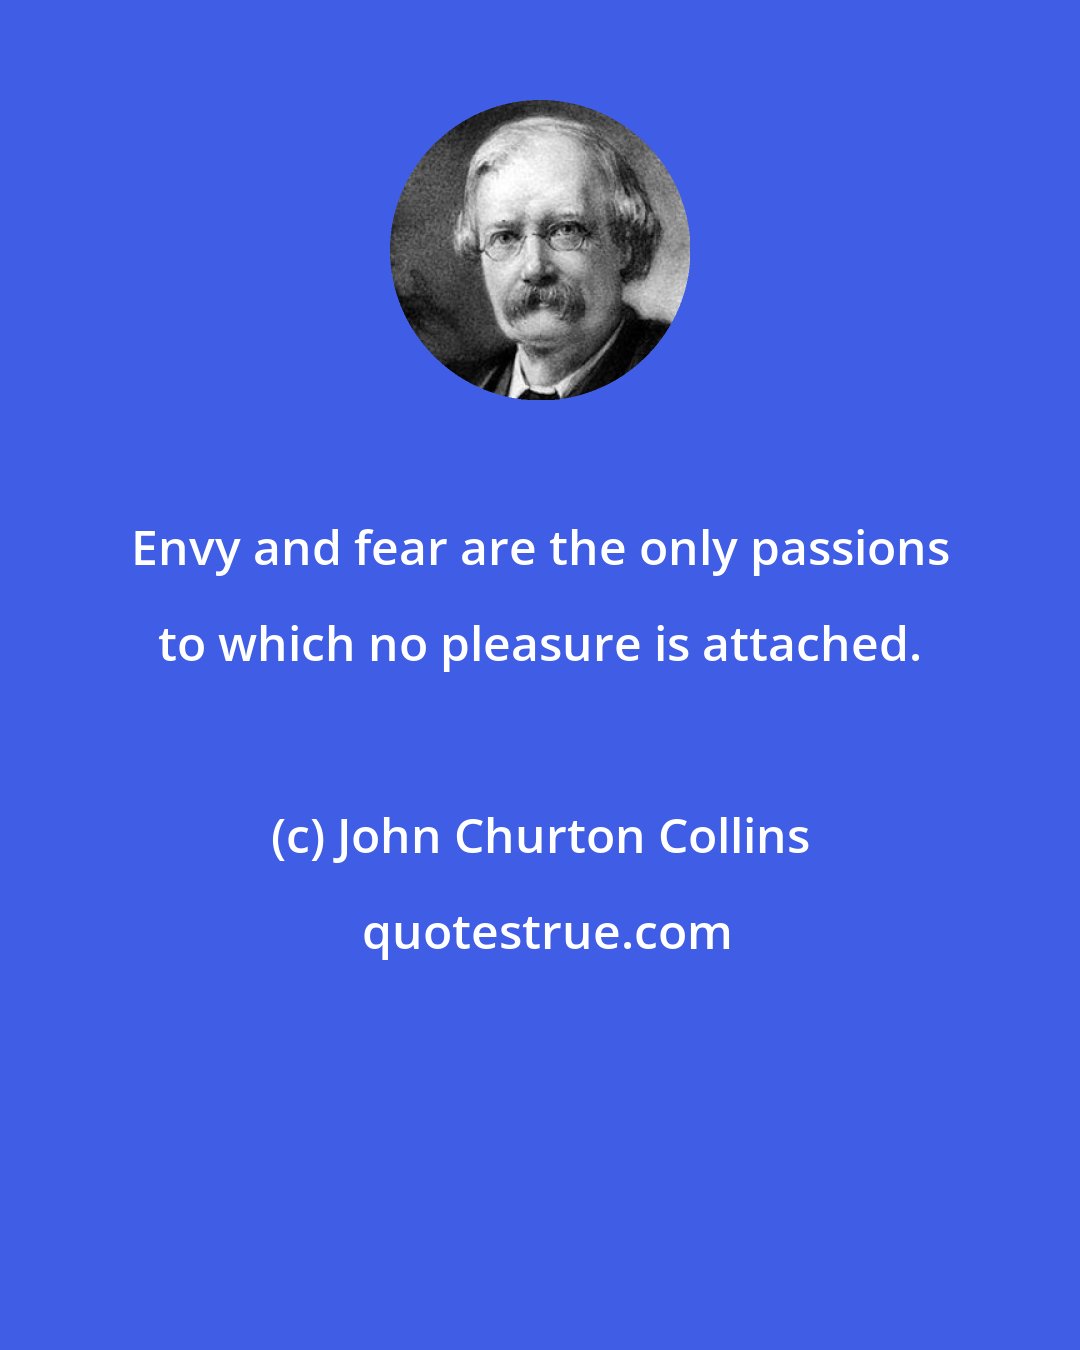 John Churton Collins: Envy and fear are the only passions to which no pleasure is attached.